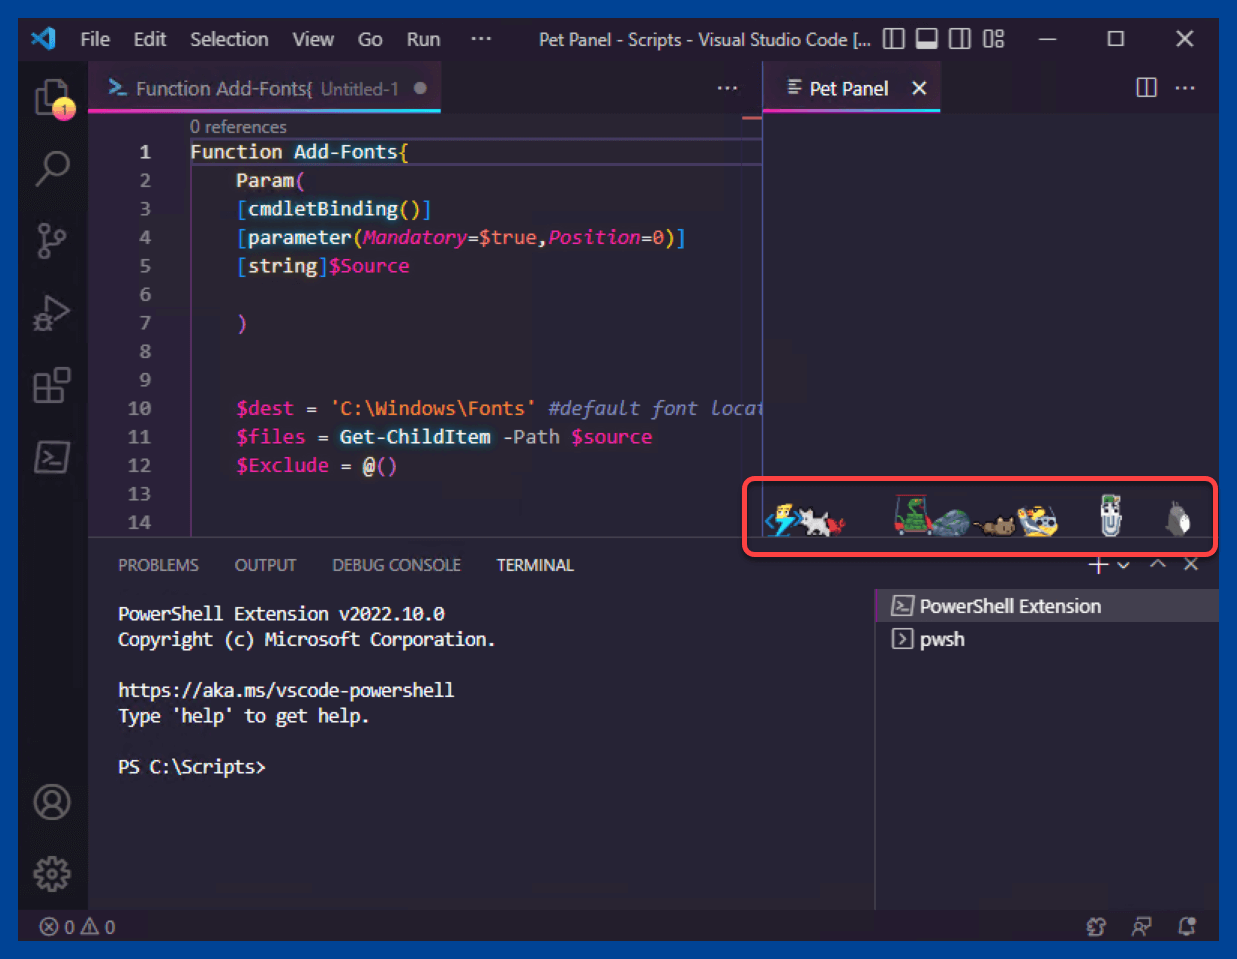 Too many pets in VS Code can get out of hand